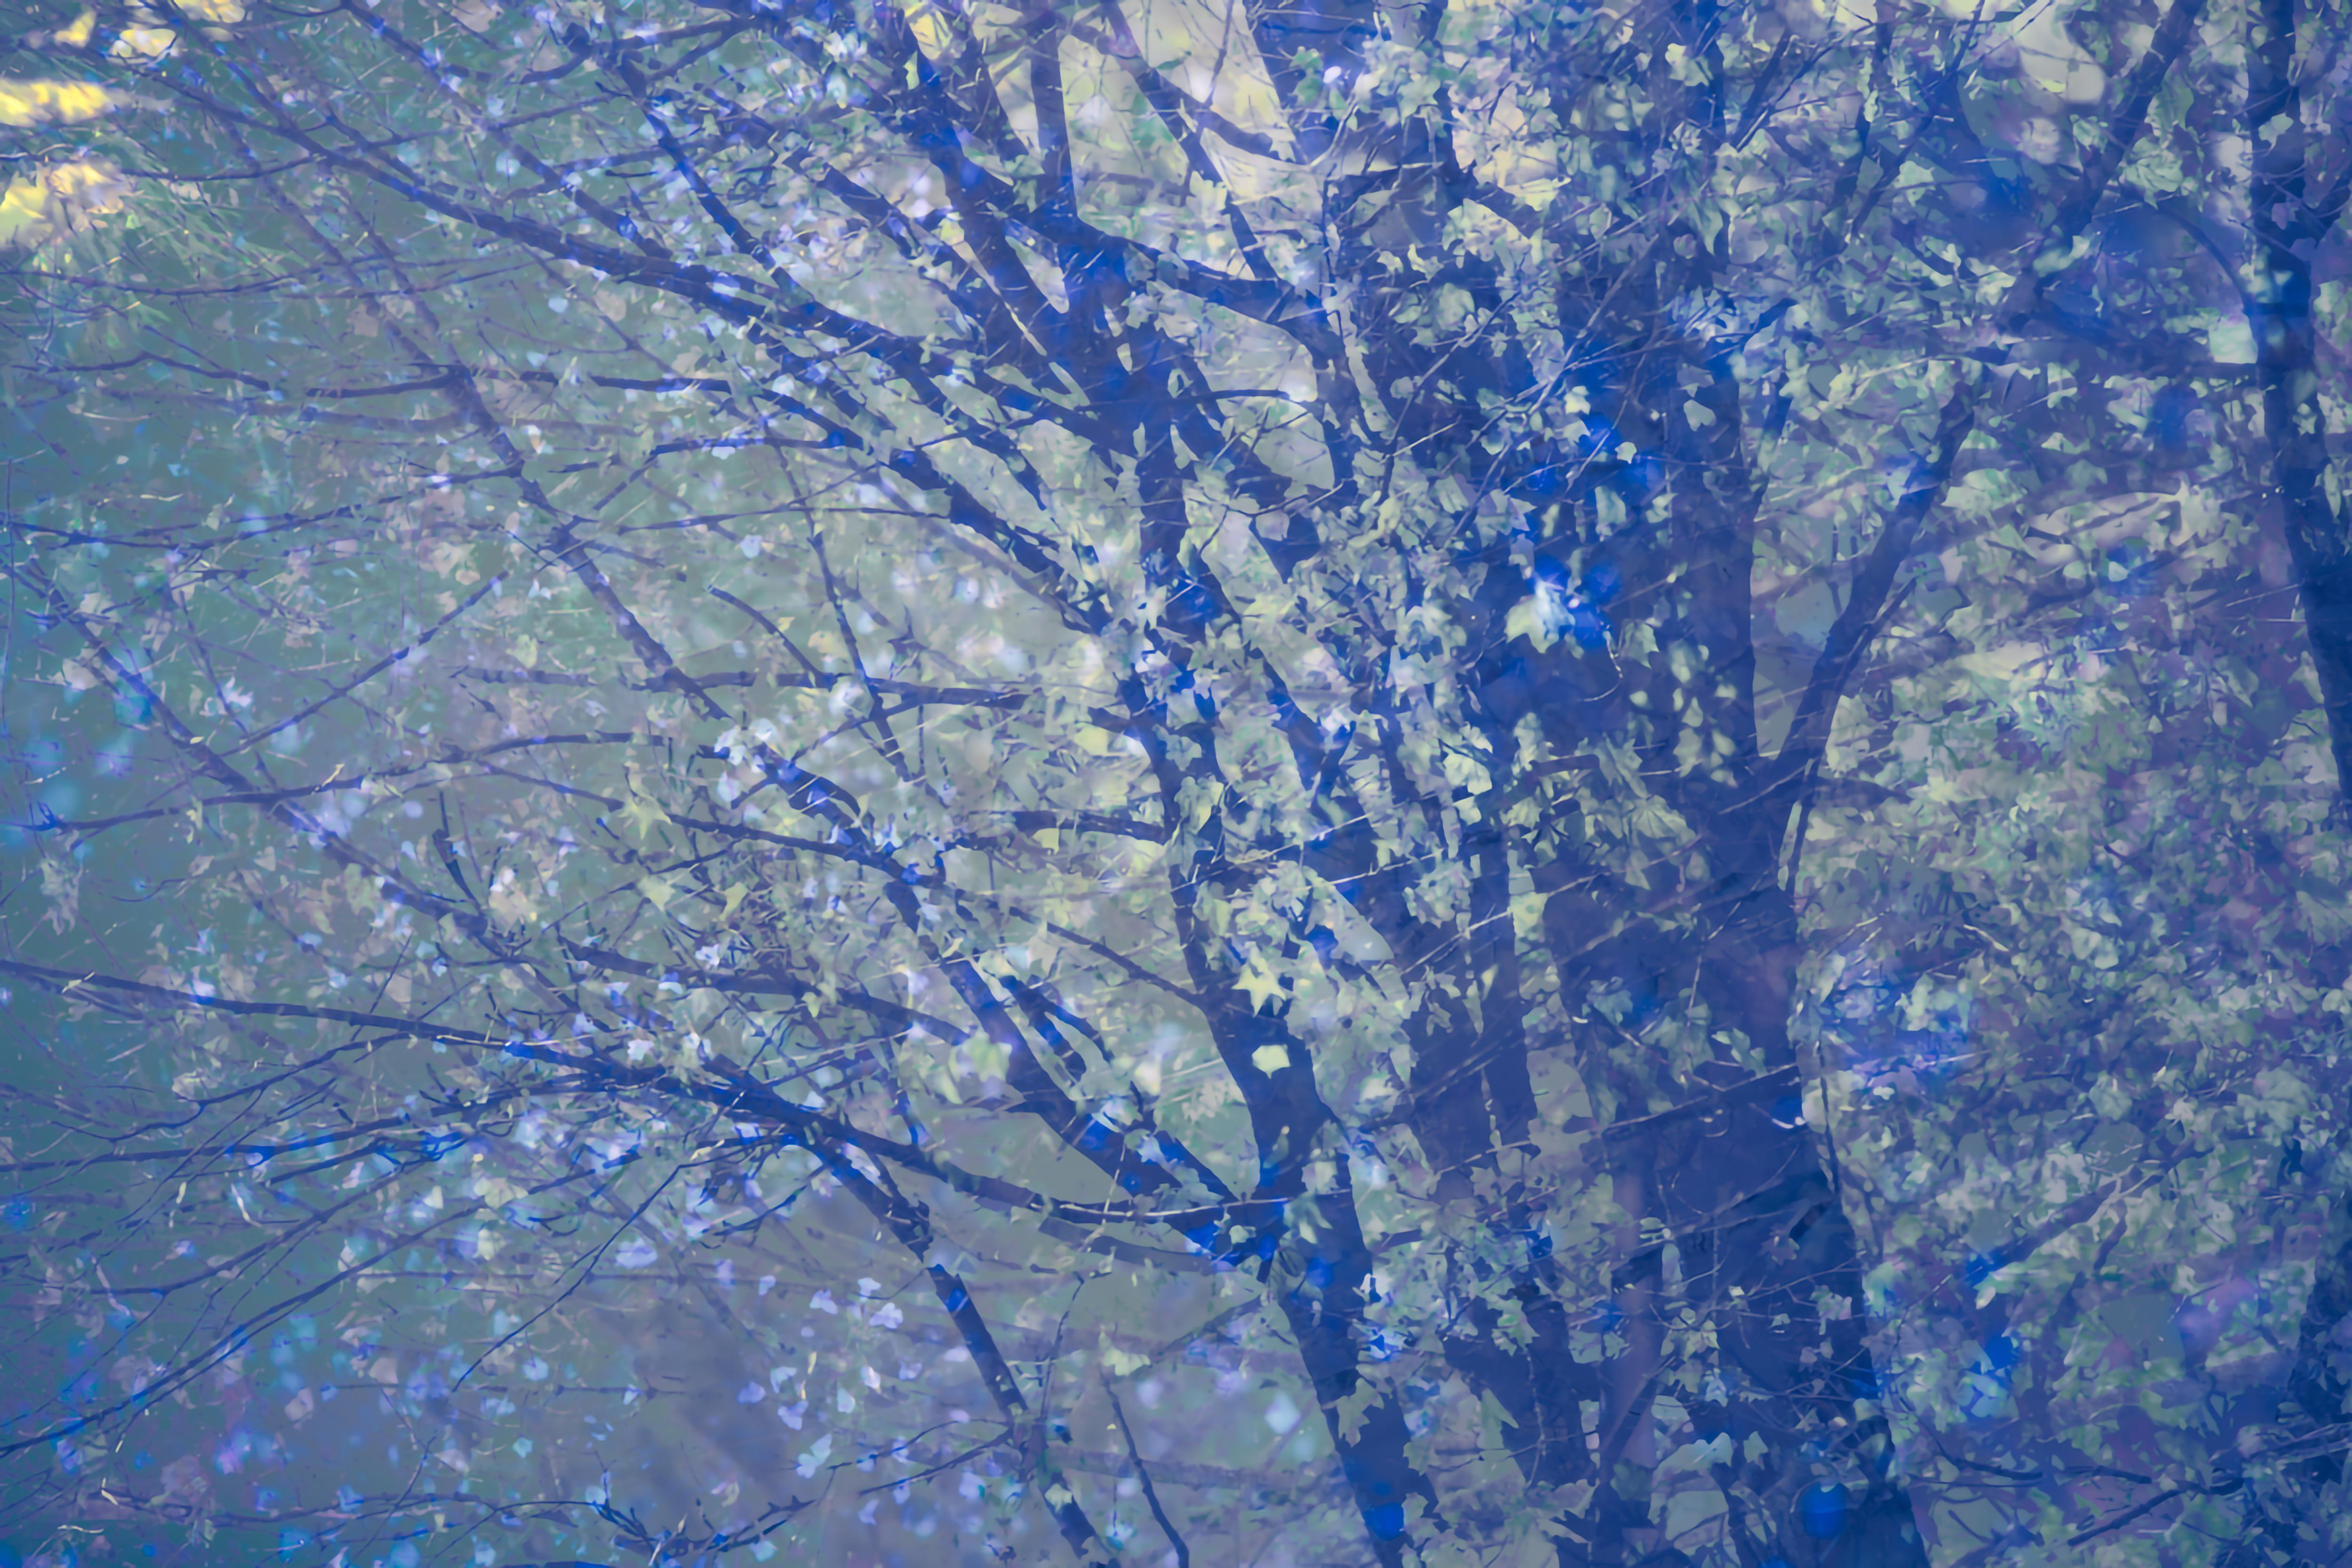 Tori Gagne Abstract Photograph - "Blue" Abstract Nature Photograph, 16" x 24"